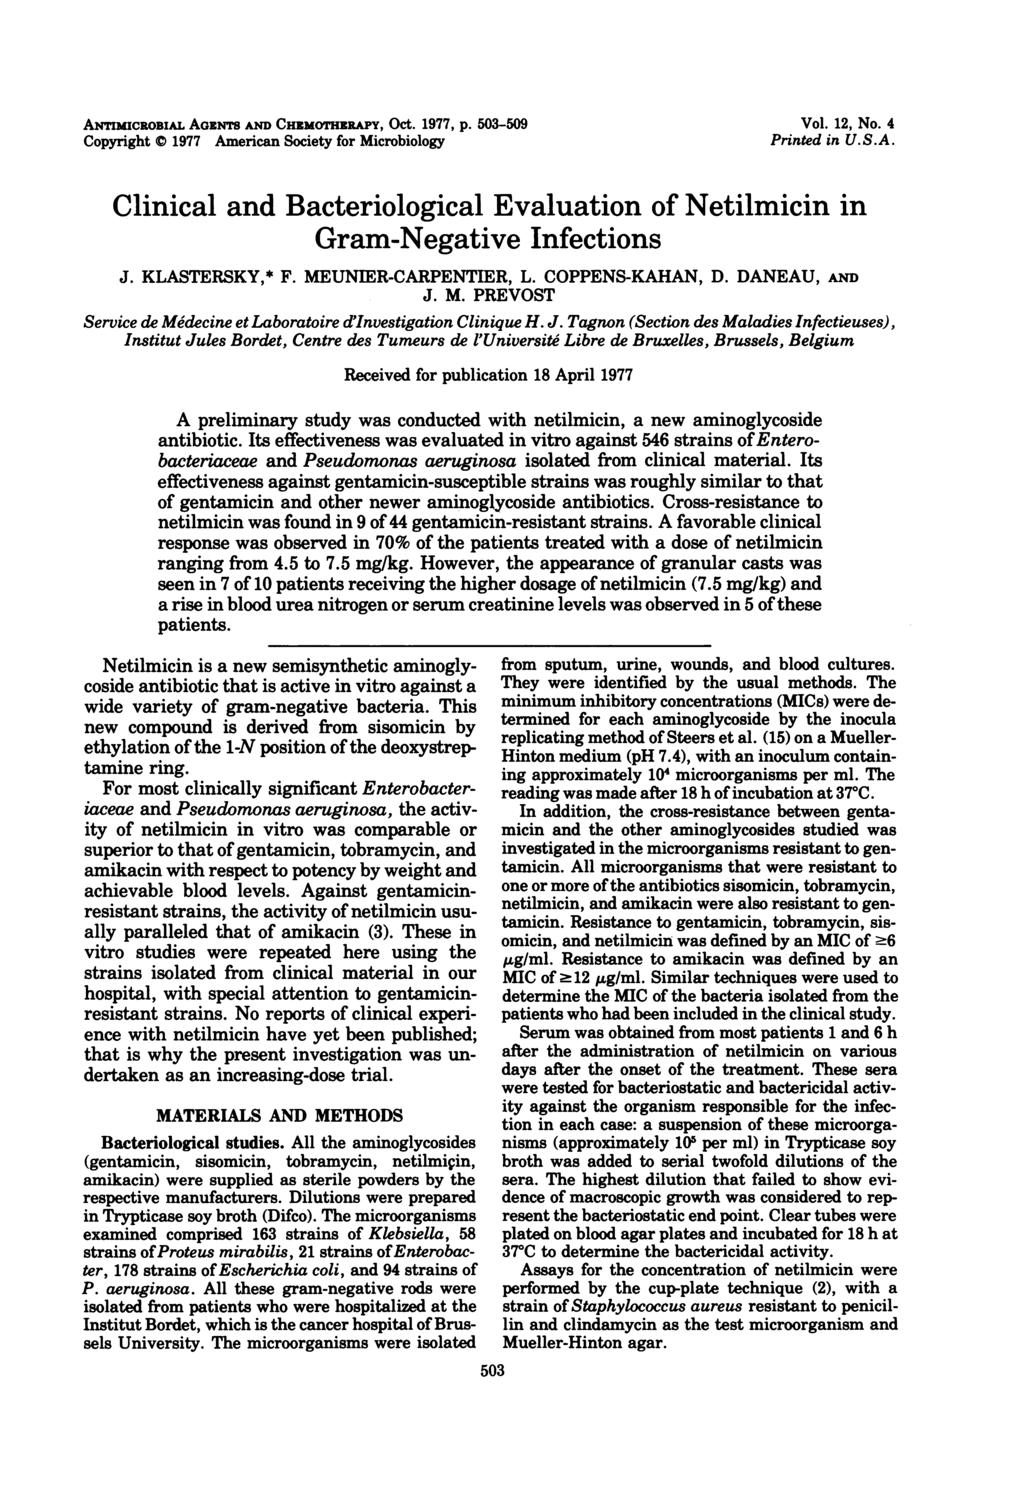 ANTrxcRoBAL AG rnts AND CHEMOTHERAPY, OCt. 1977, p. 53-59 Copyright 1977 American Society for Microbiology Vol. 12, No. 4 Printed in U.S.A. Clinical and Bacteriological Evaluation of Netilmicin in Gram-Negative nfections J.